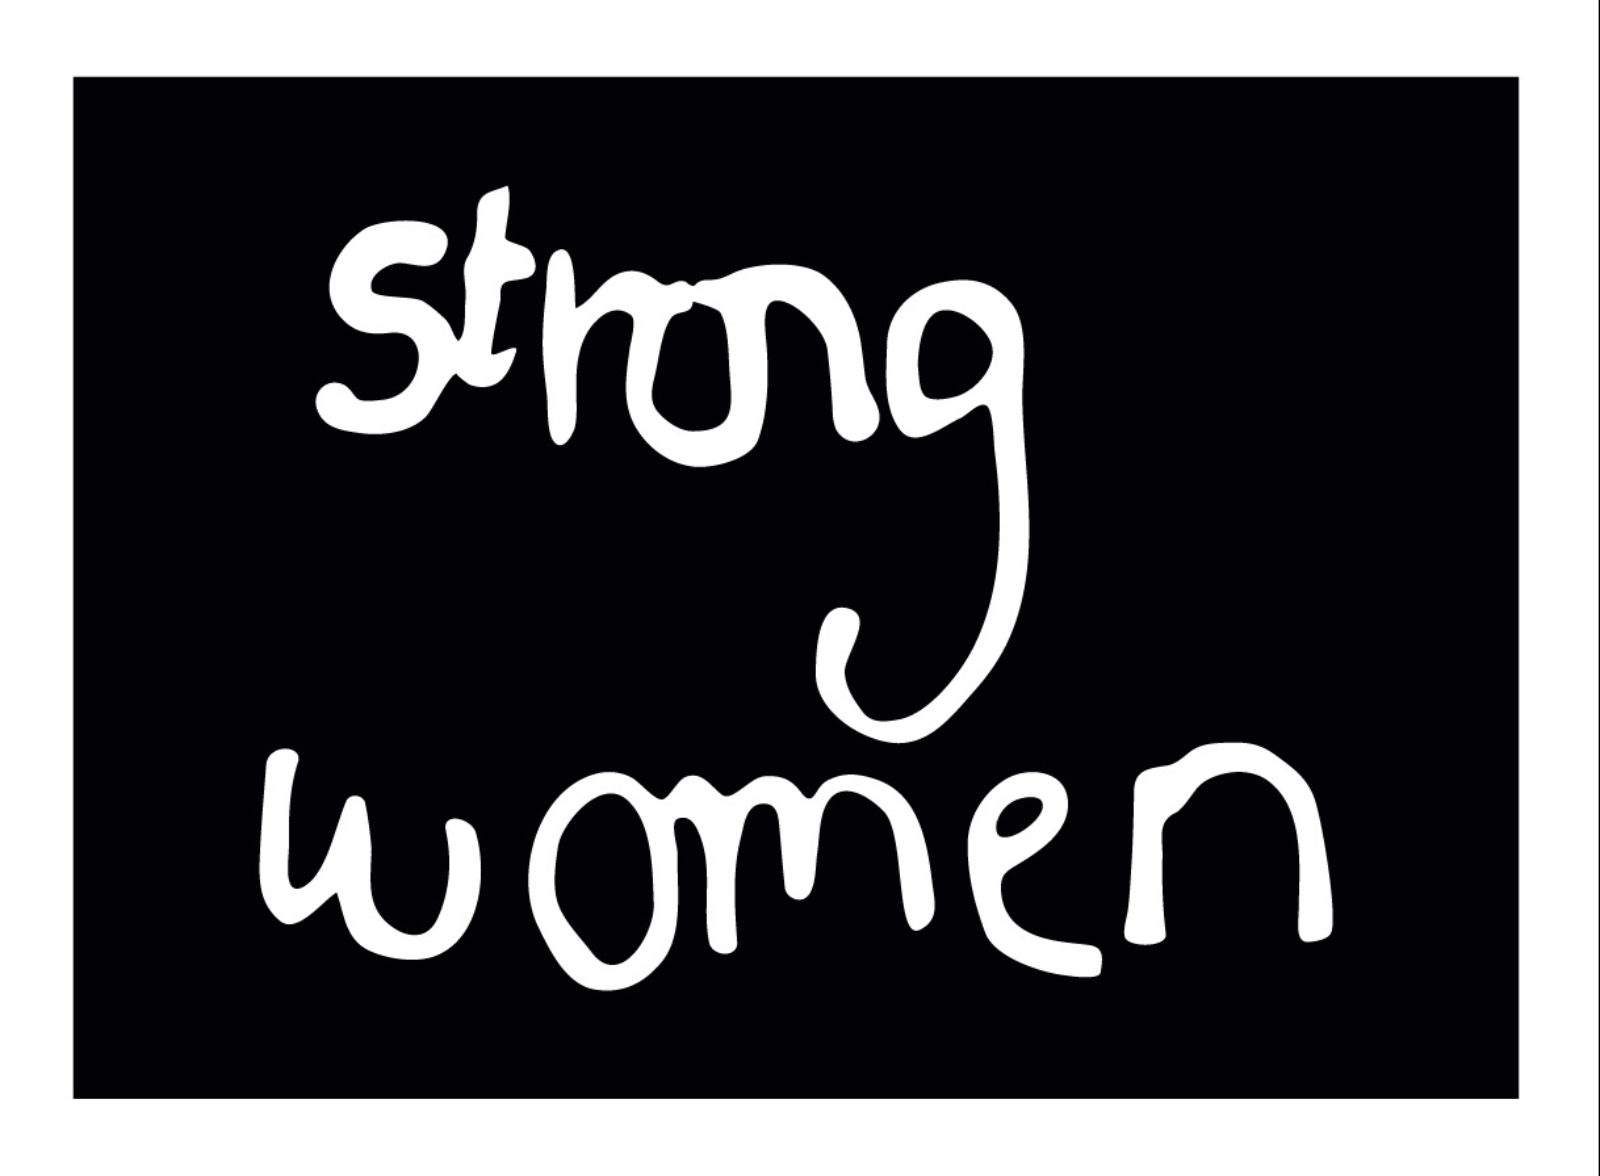 'Strong women' in white writing on a black background.